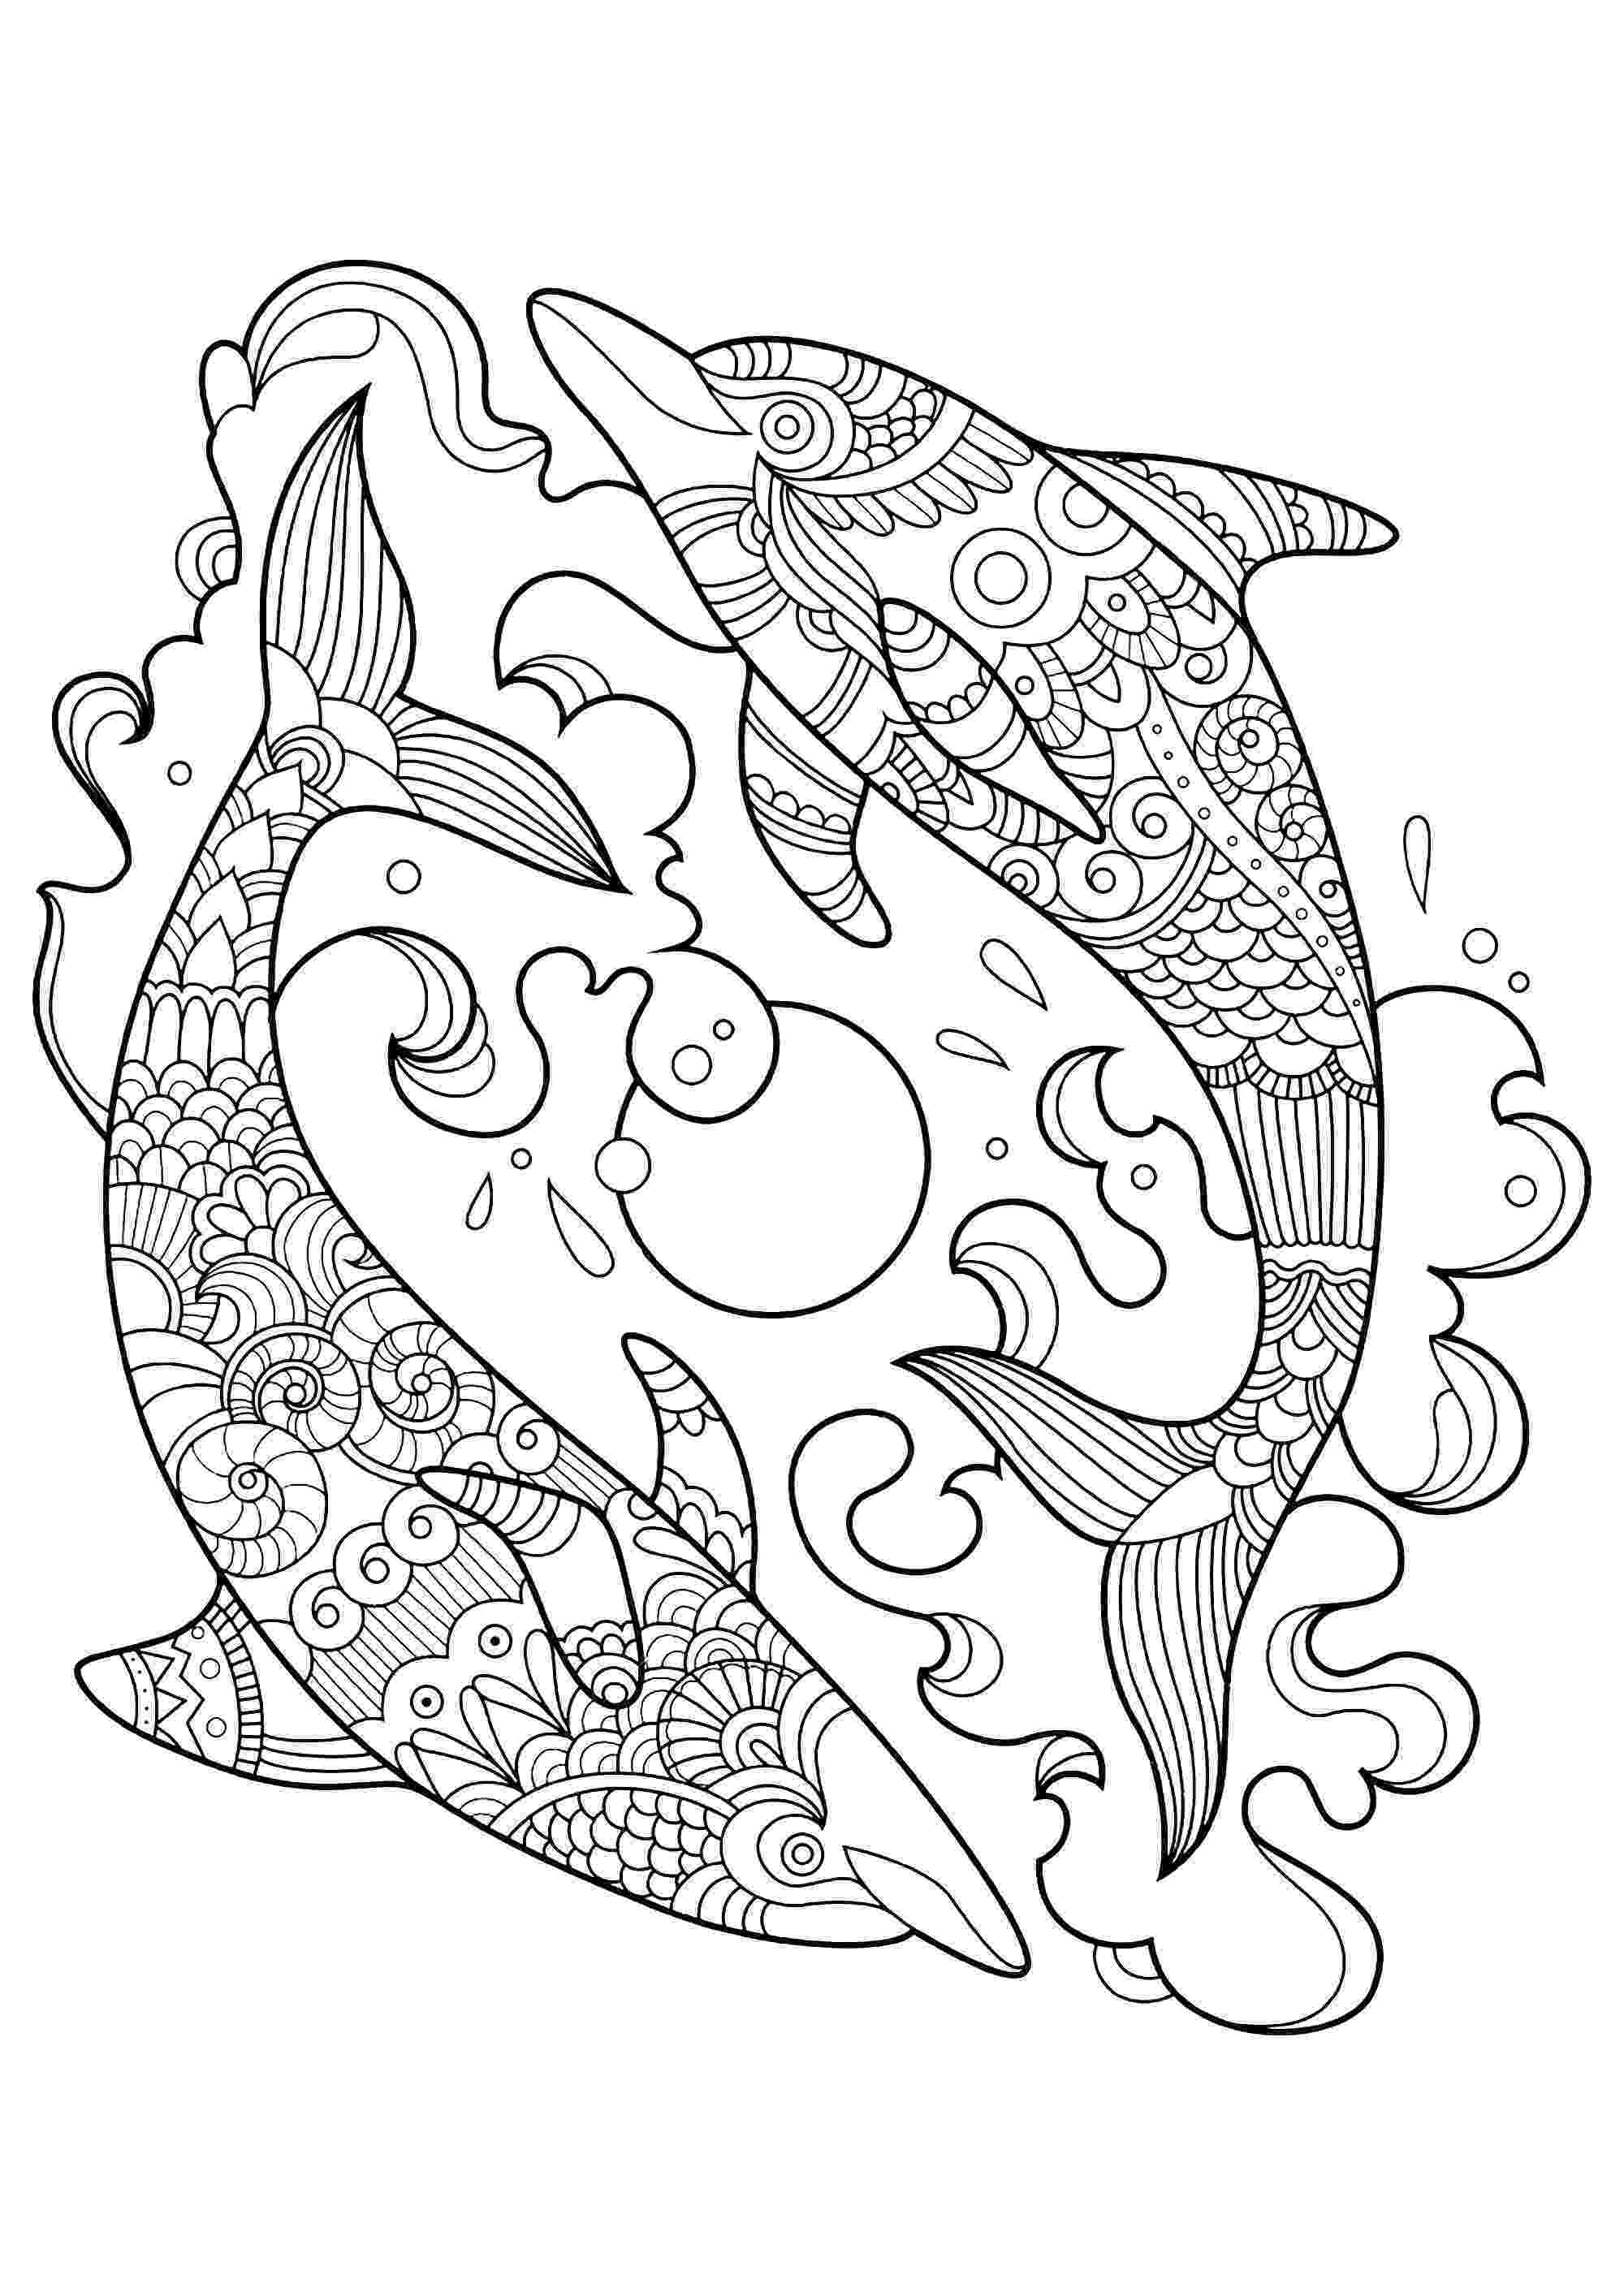 dolphin coloring pages to print dolphins to color for children dolphins kids coloring pages dolphin to pages coloring print 